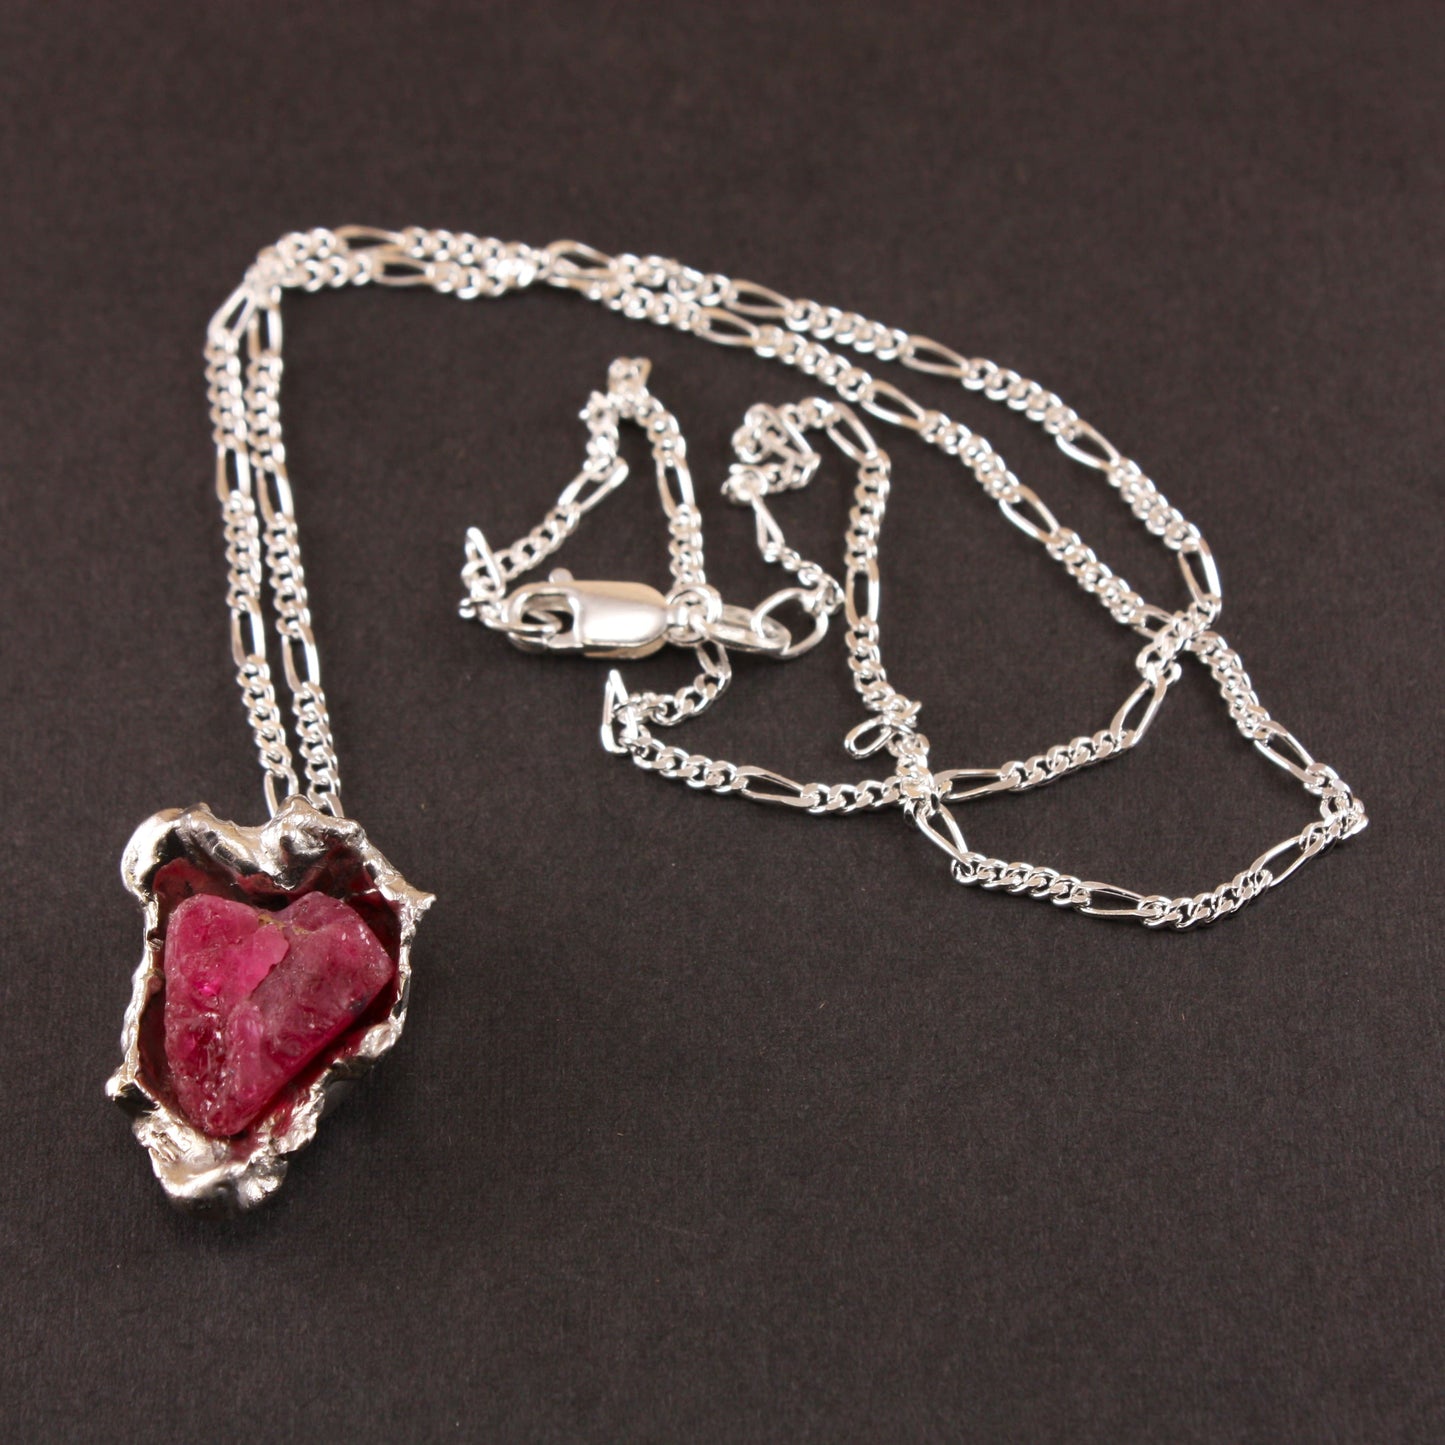 Water Cast with Pink Spinel